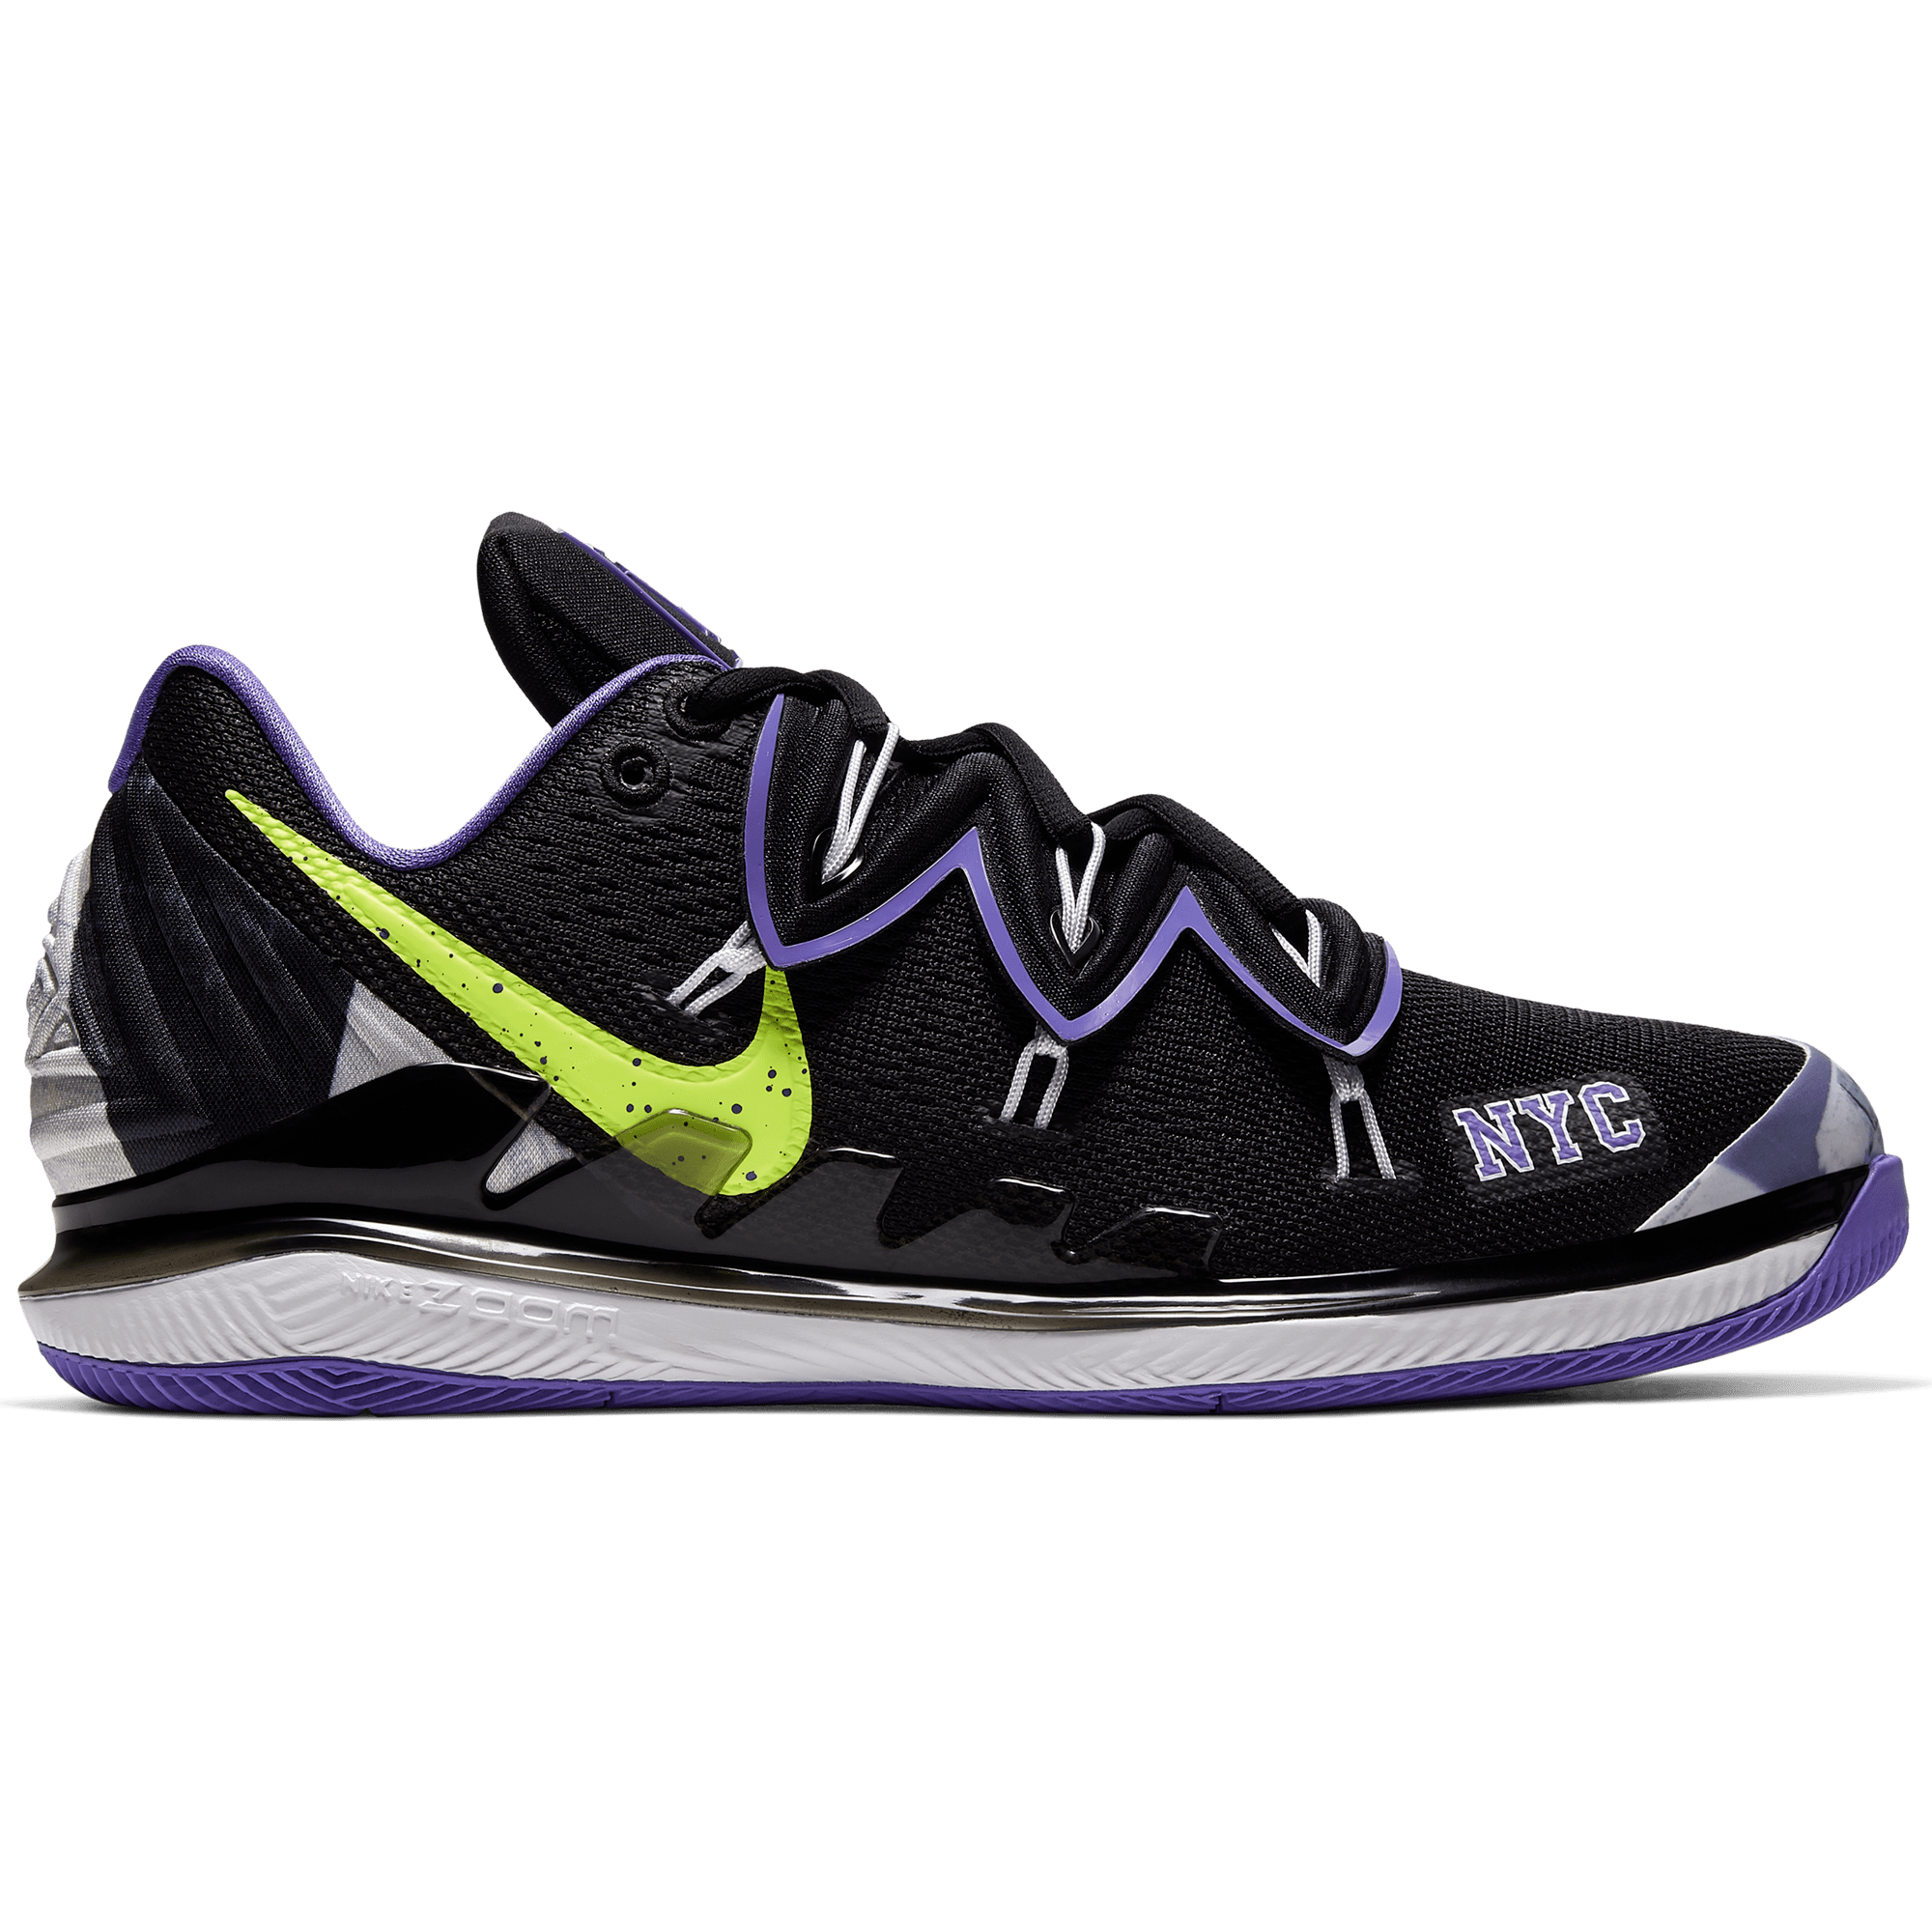 kyrie 5 tennis shoes